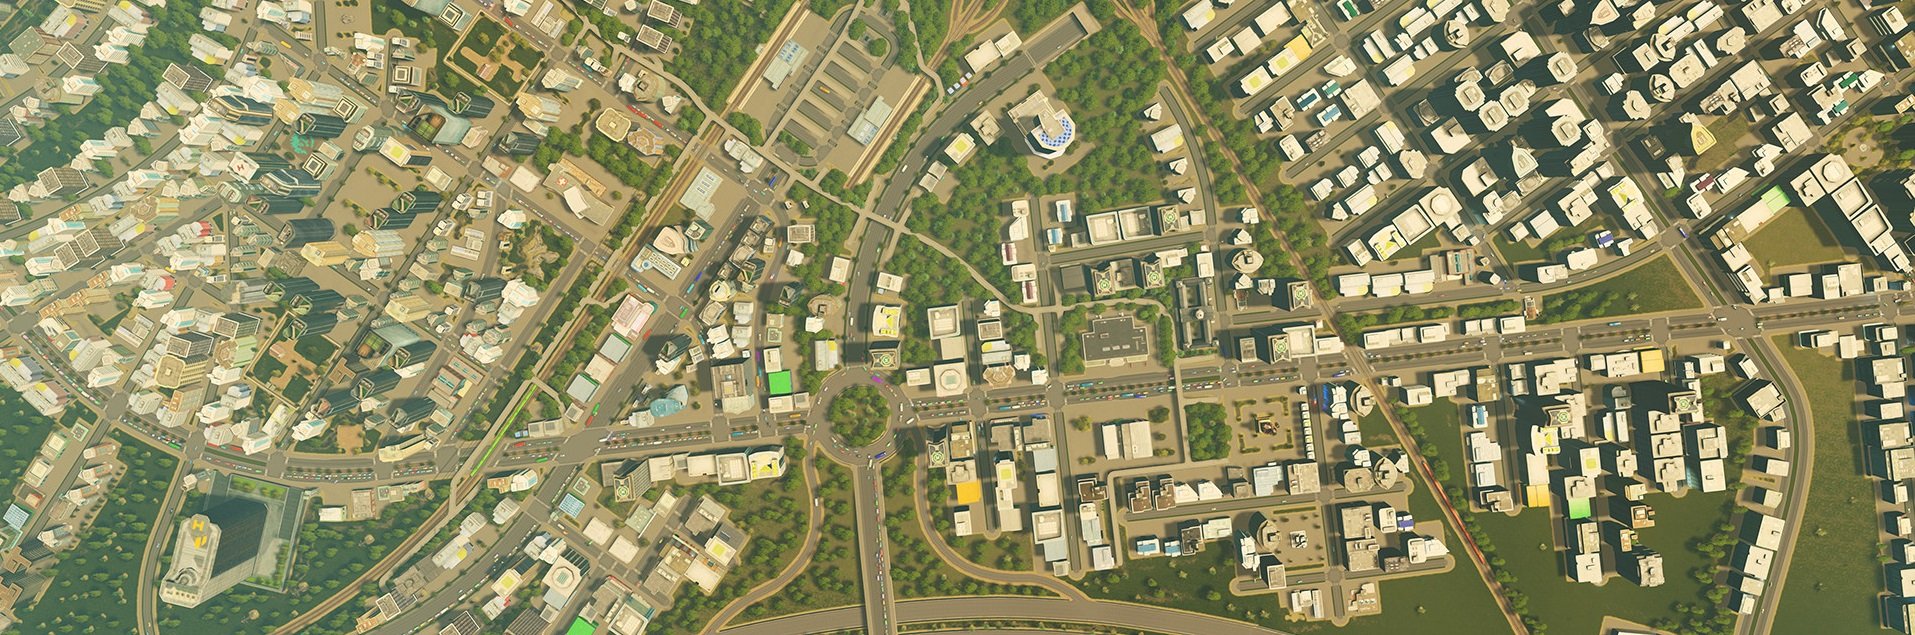 Cities Skylines 2 Gameplay Improvements: What Should the Devs Do?